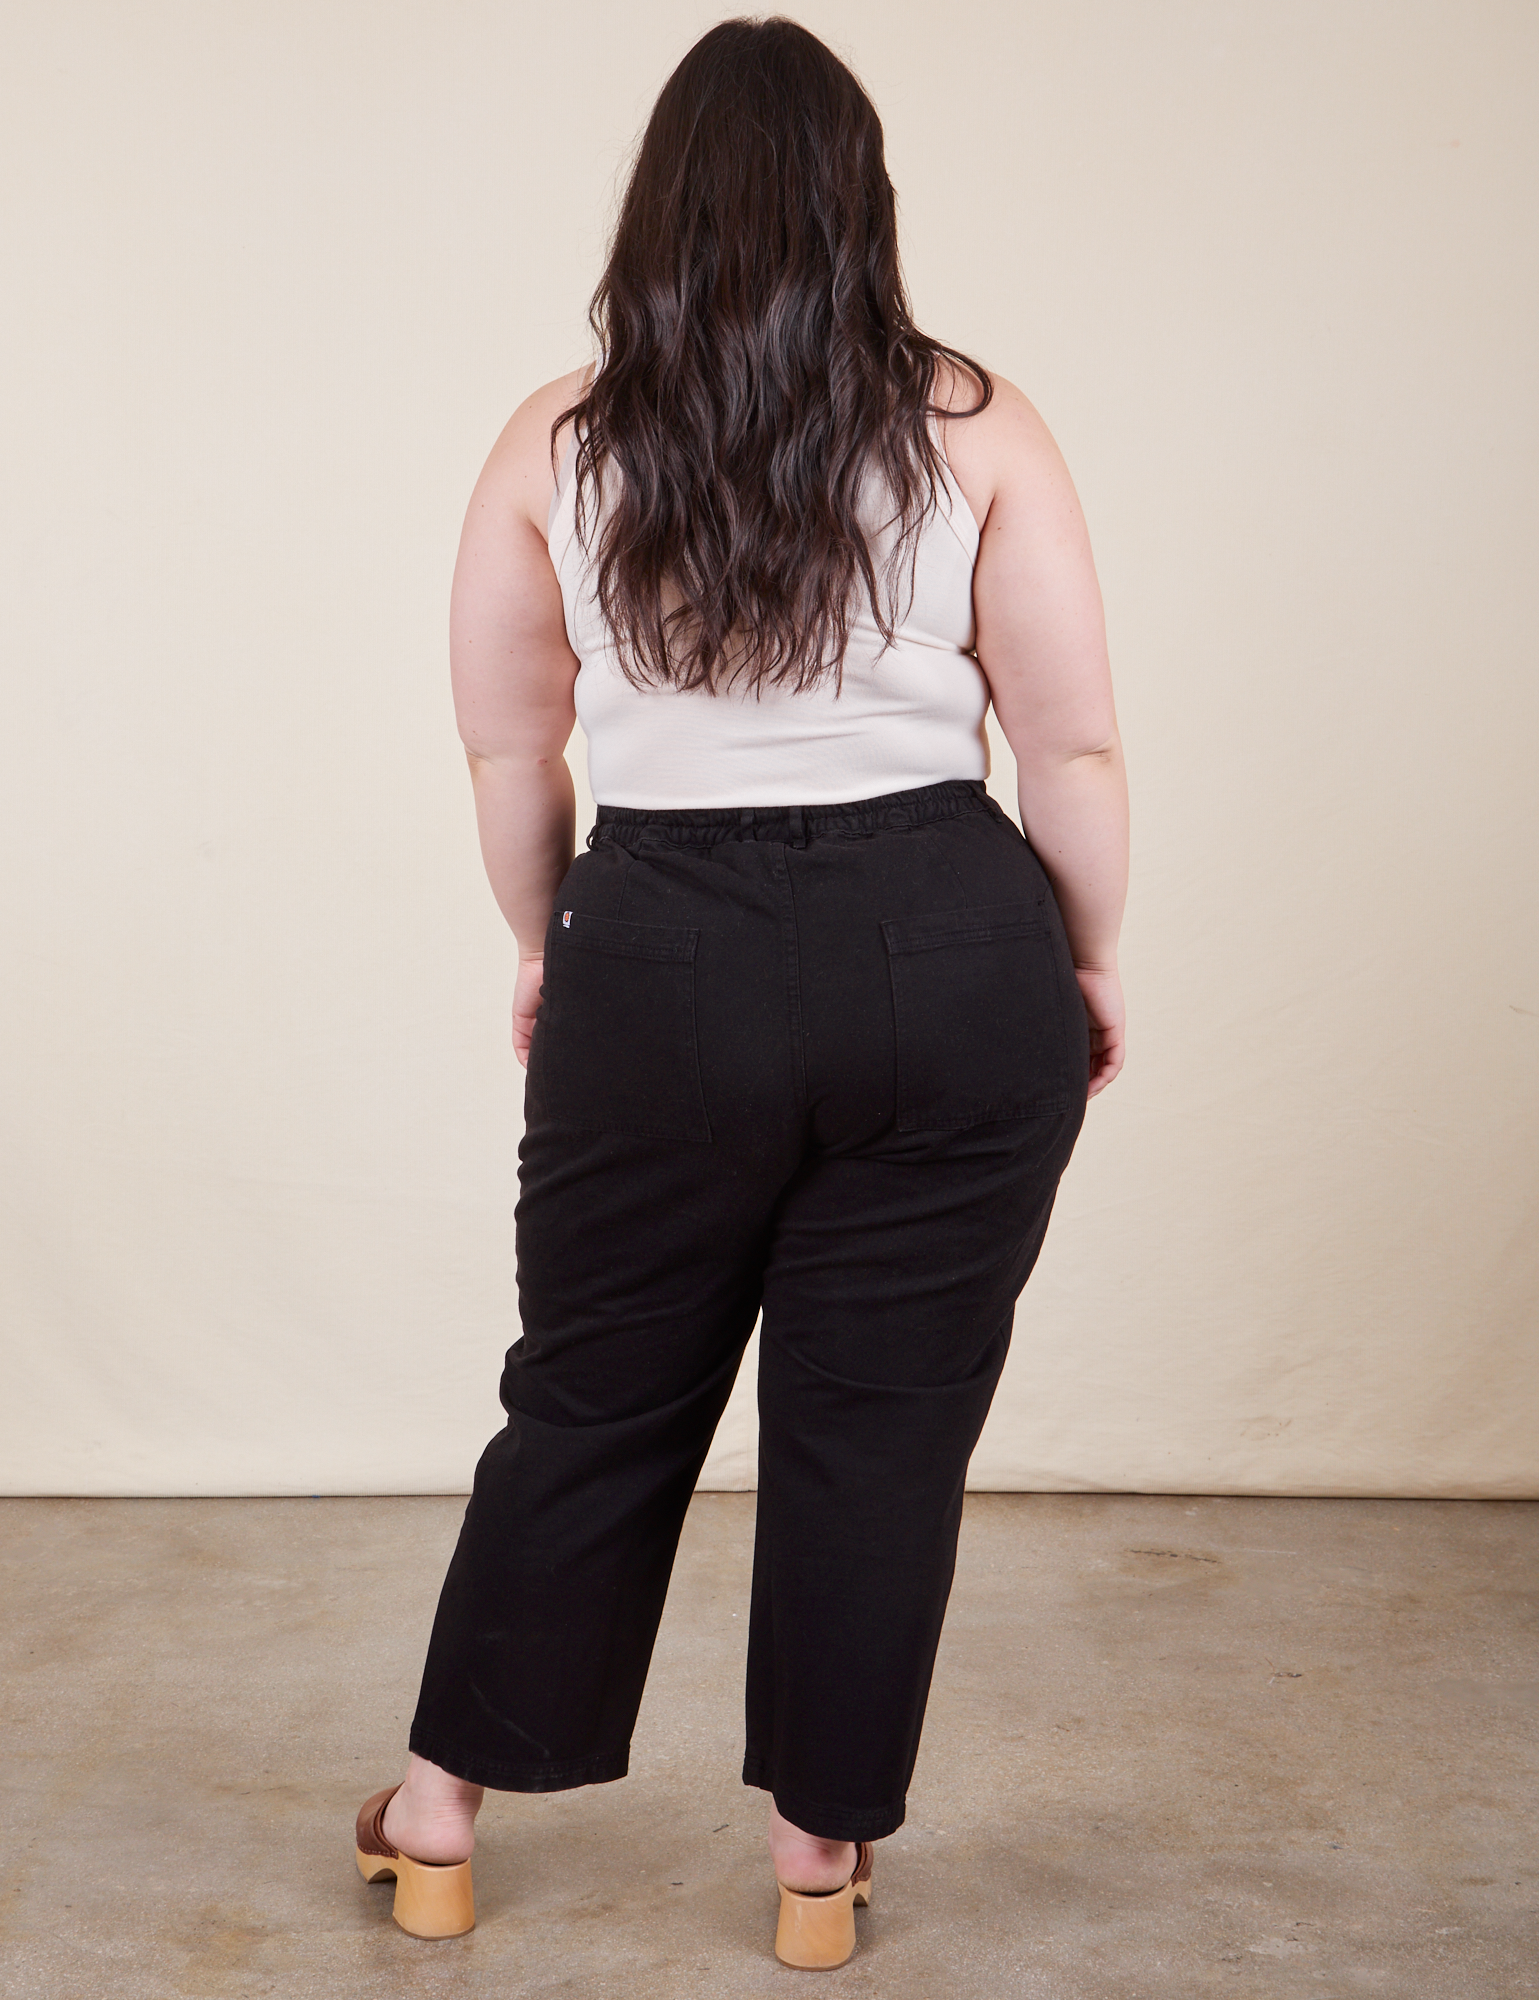 Work Pants in Basic Black back view on Ashley wearing Tank Top in vintage tee off-white